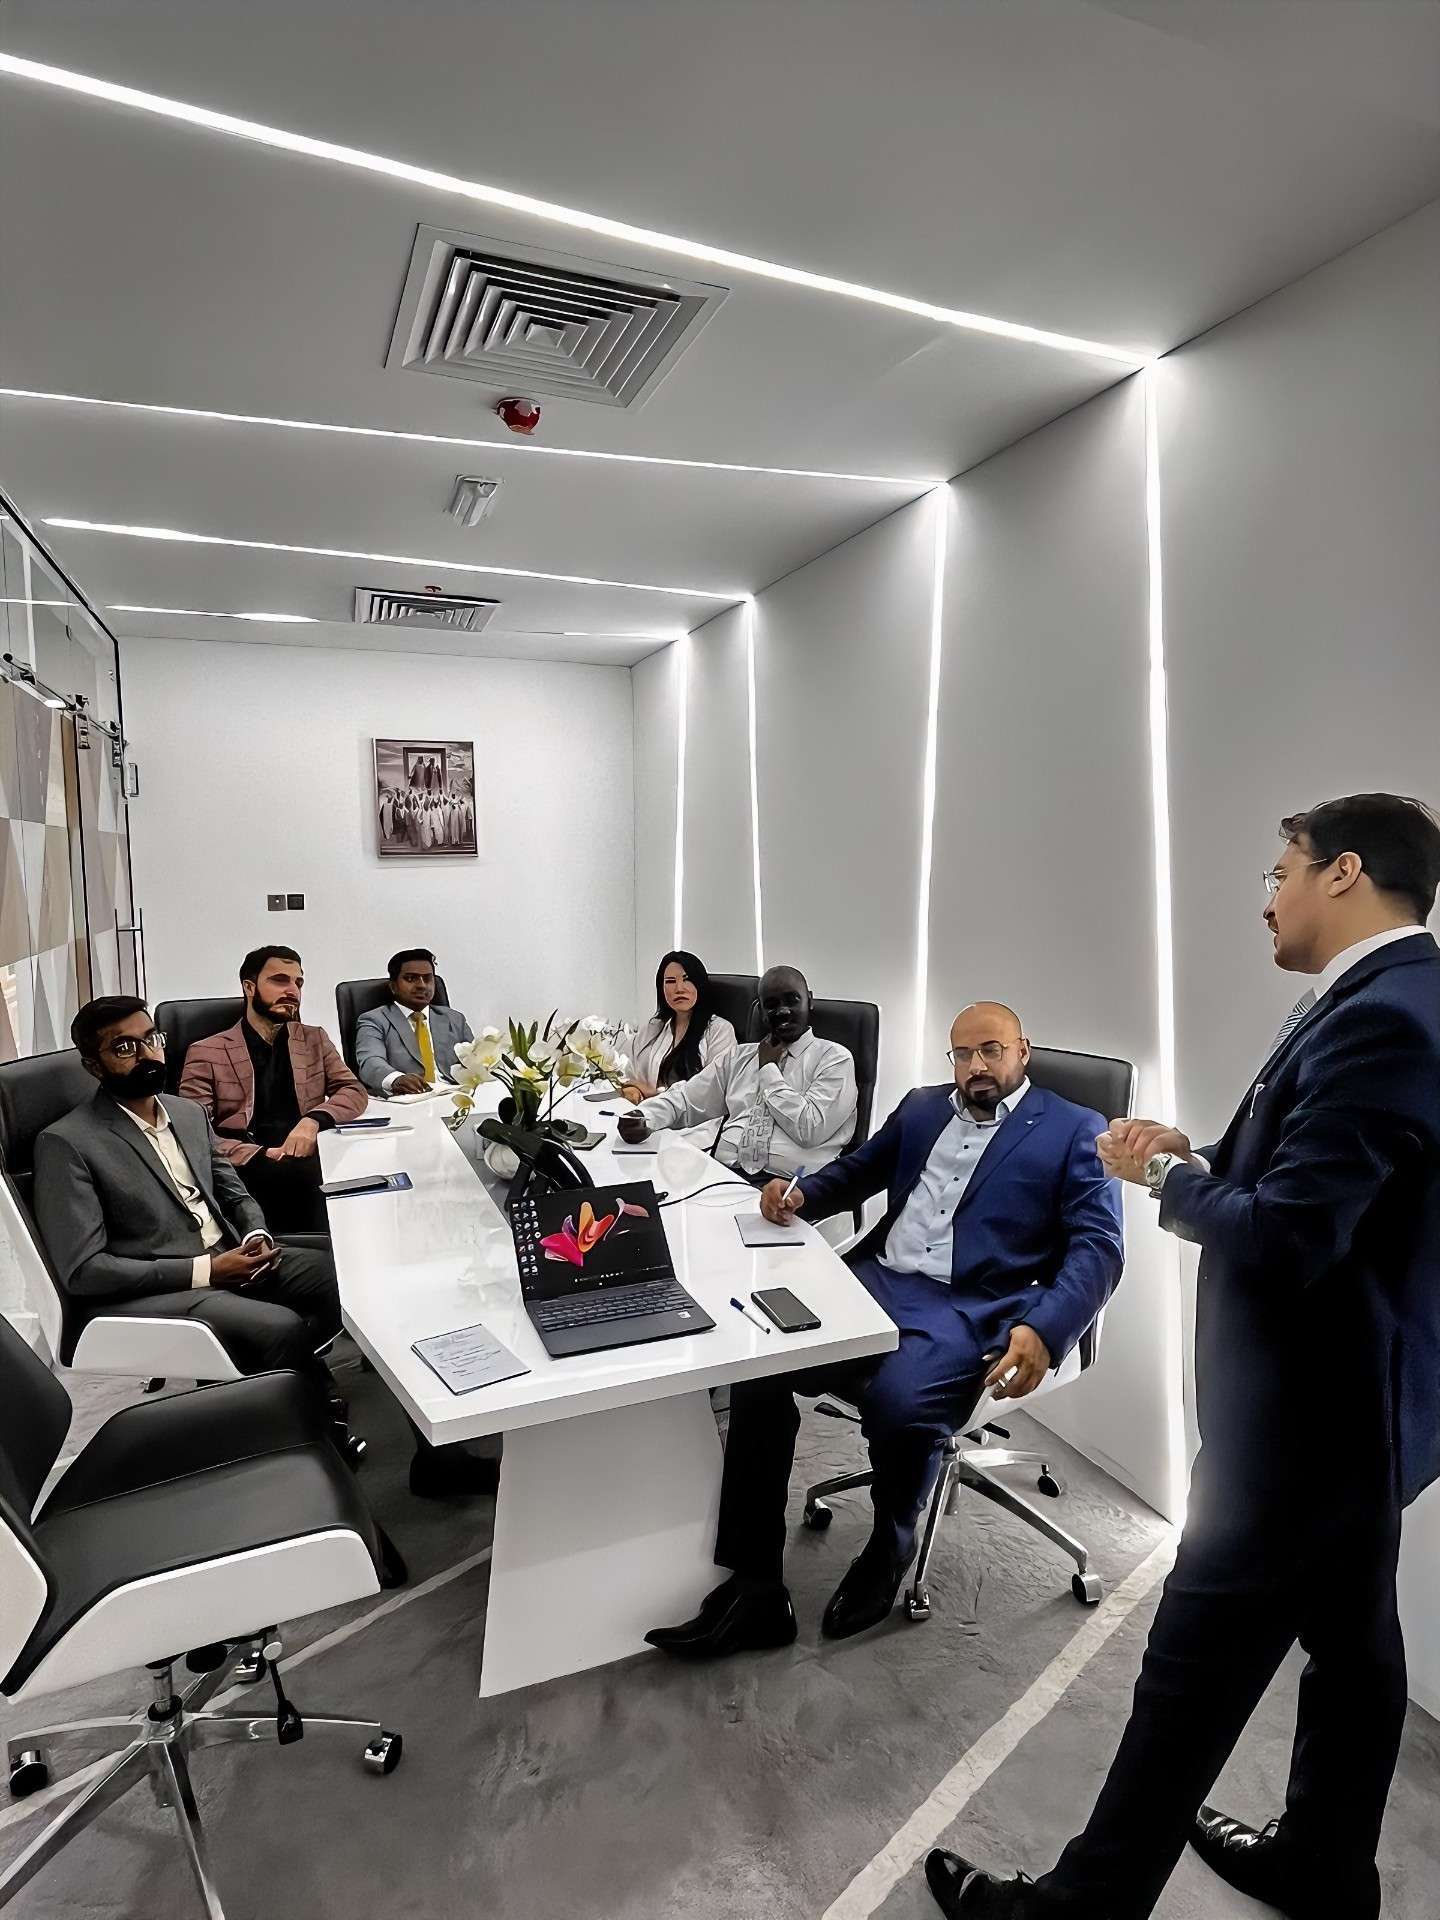 At the Truss Real Estate Dubai office, CEO Mohamad Aftab briefs his team on the latest market trends.